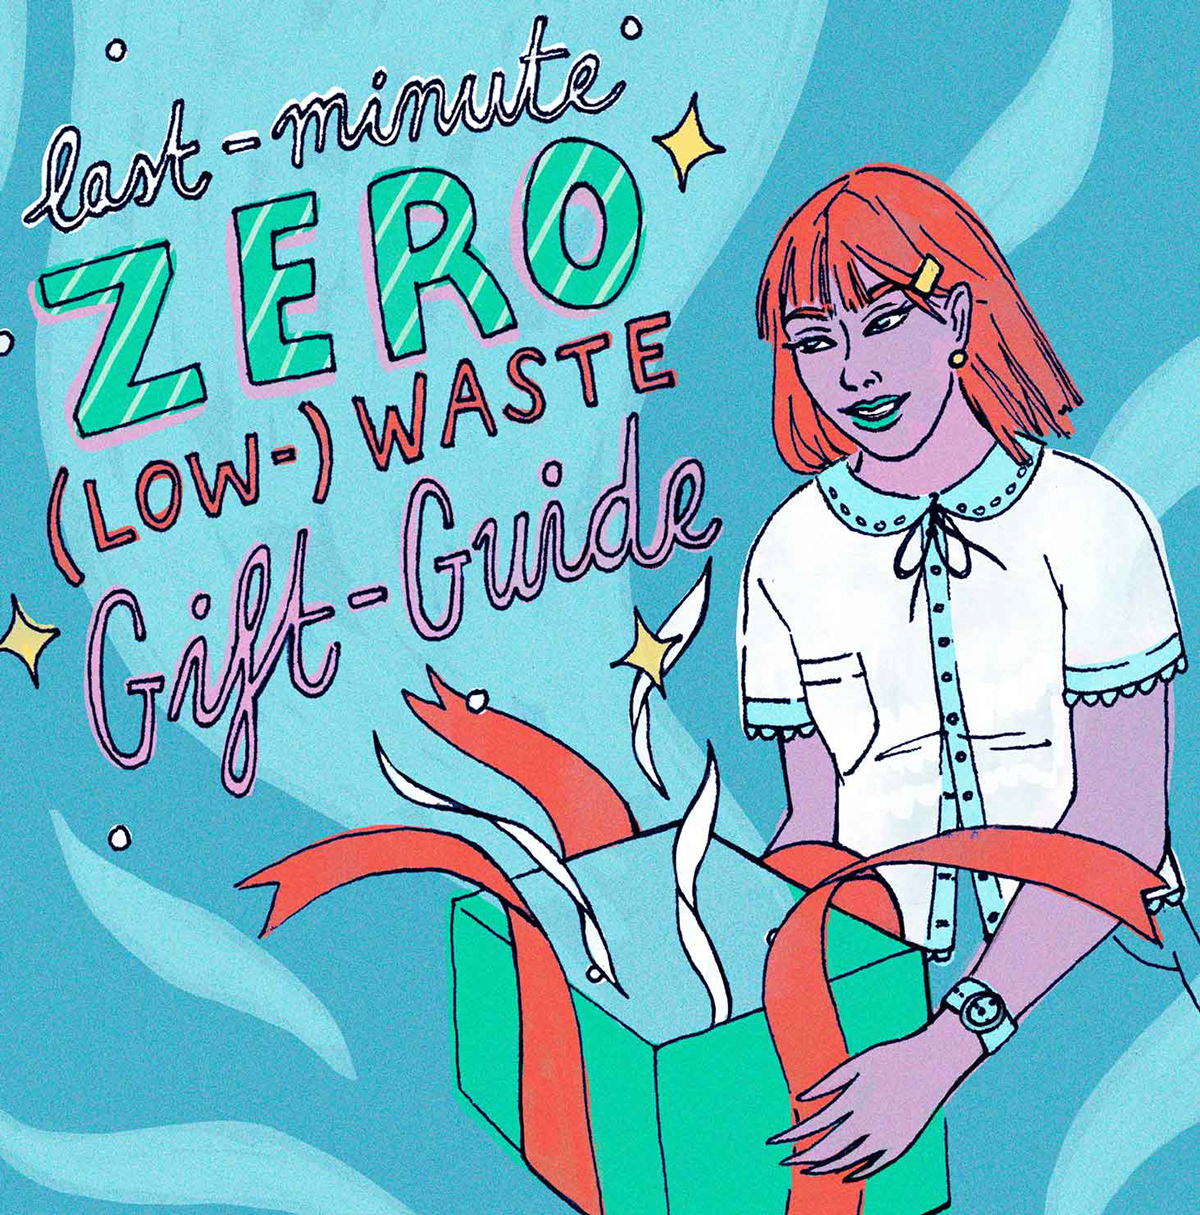 zero waste Low waste Sustainable gift guide eco-friendly Minimalism less is more